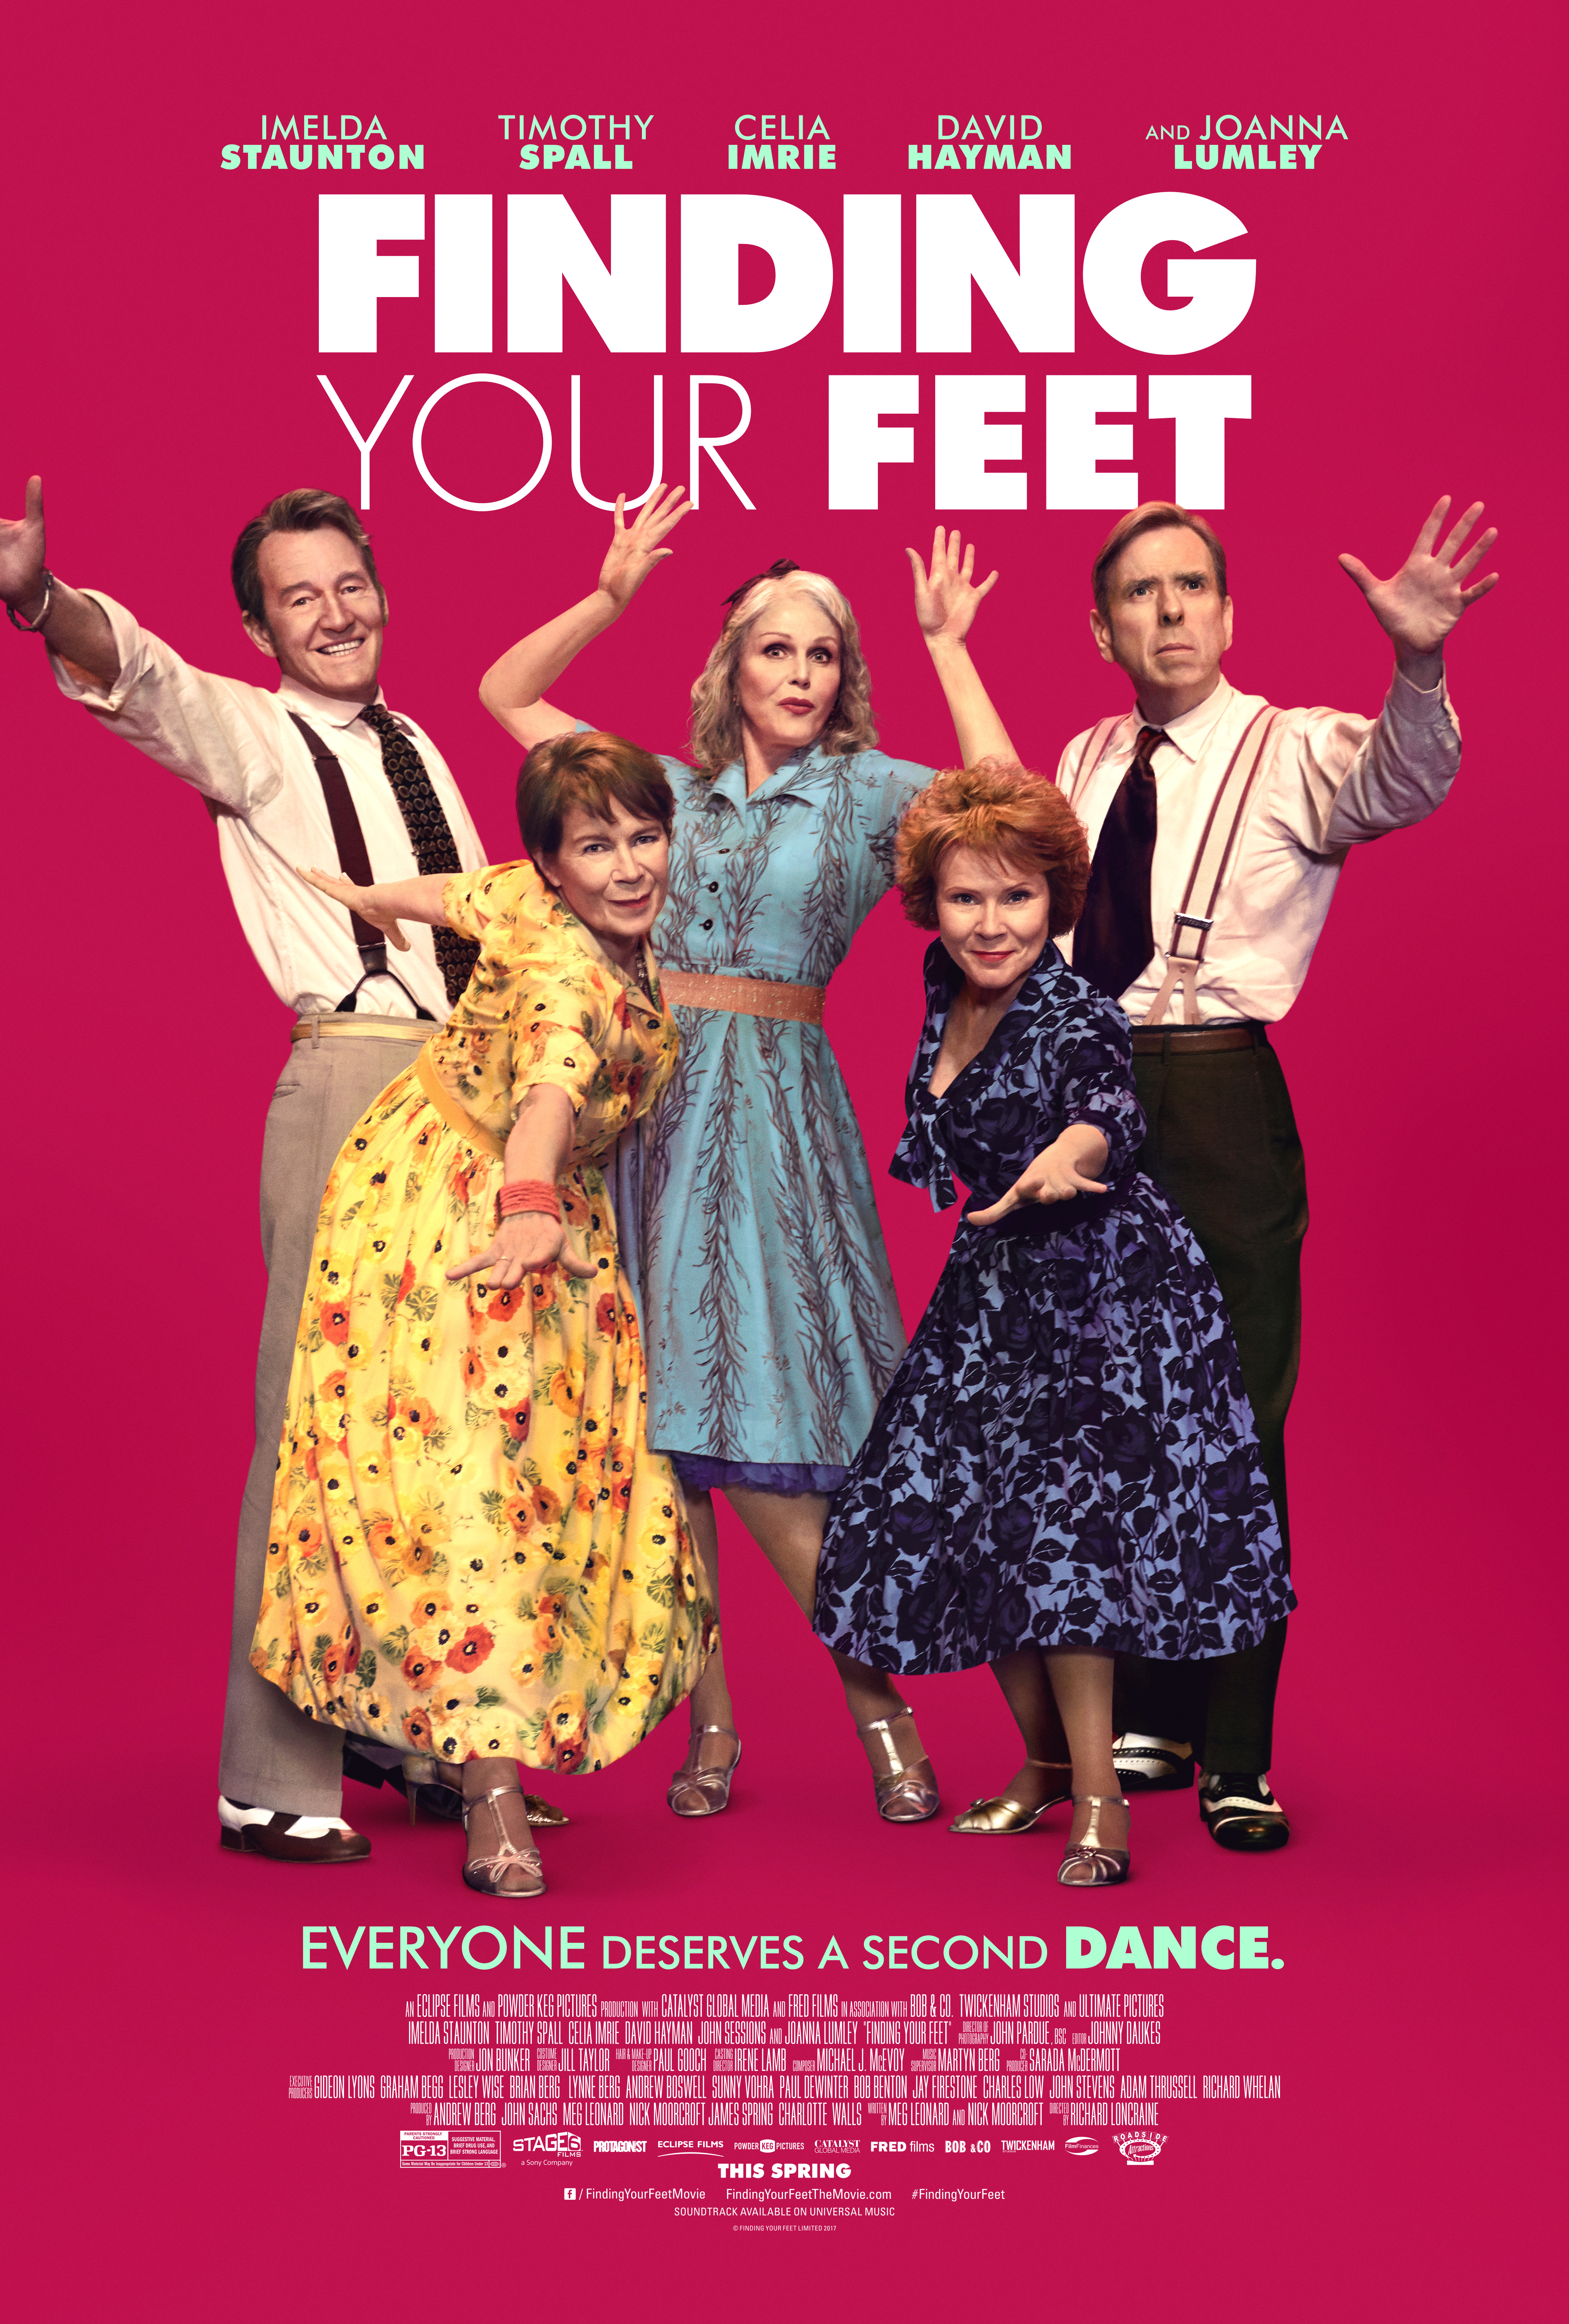 Finding Your Feet poster (Roadside Attractions)